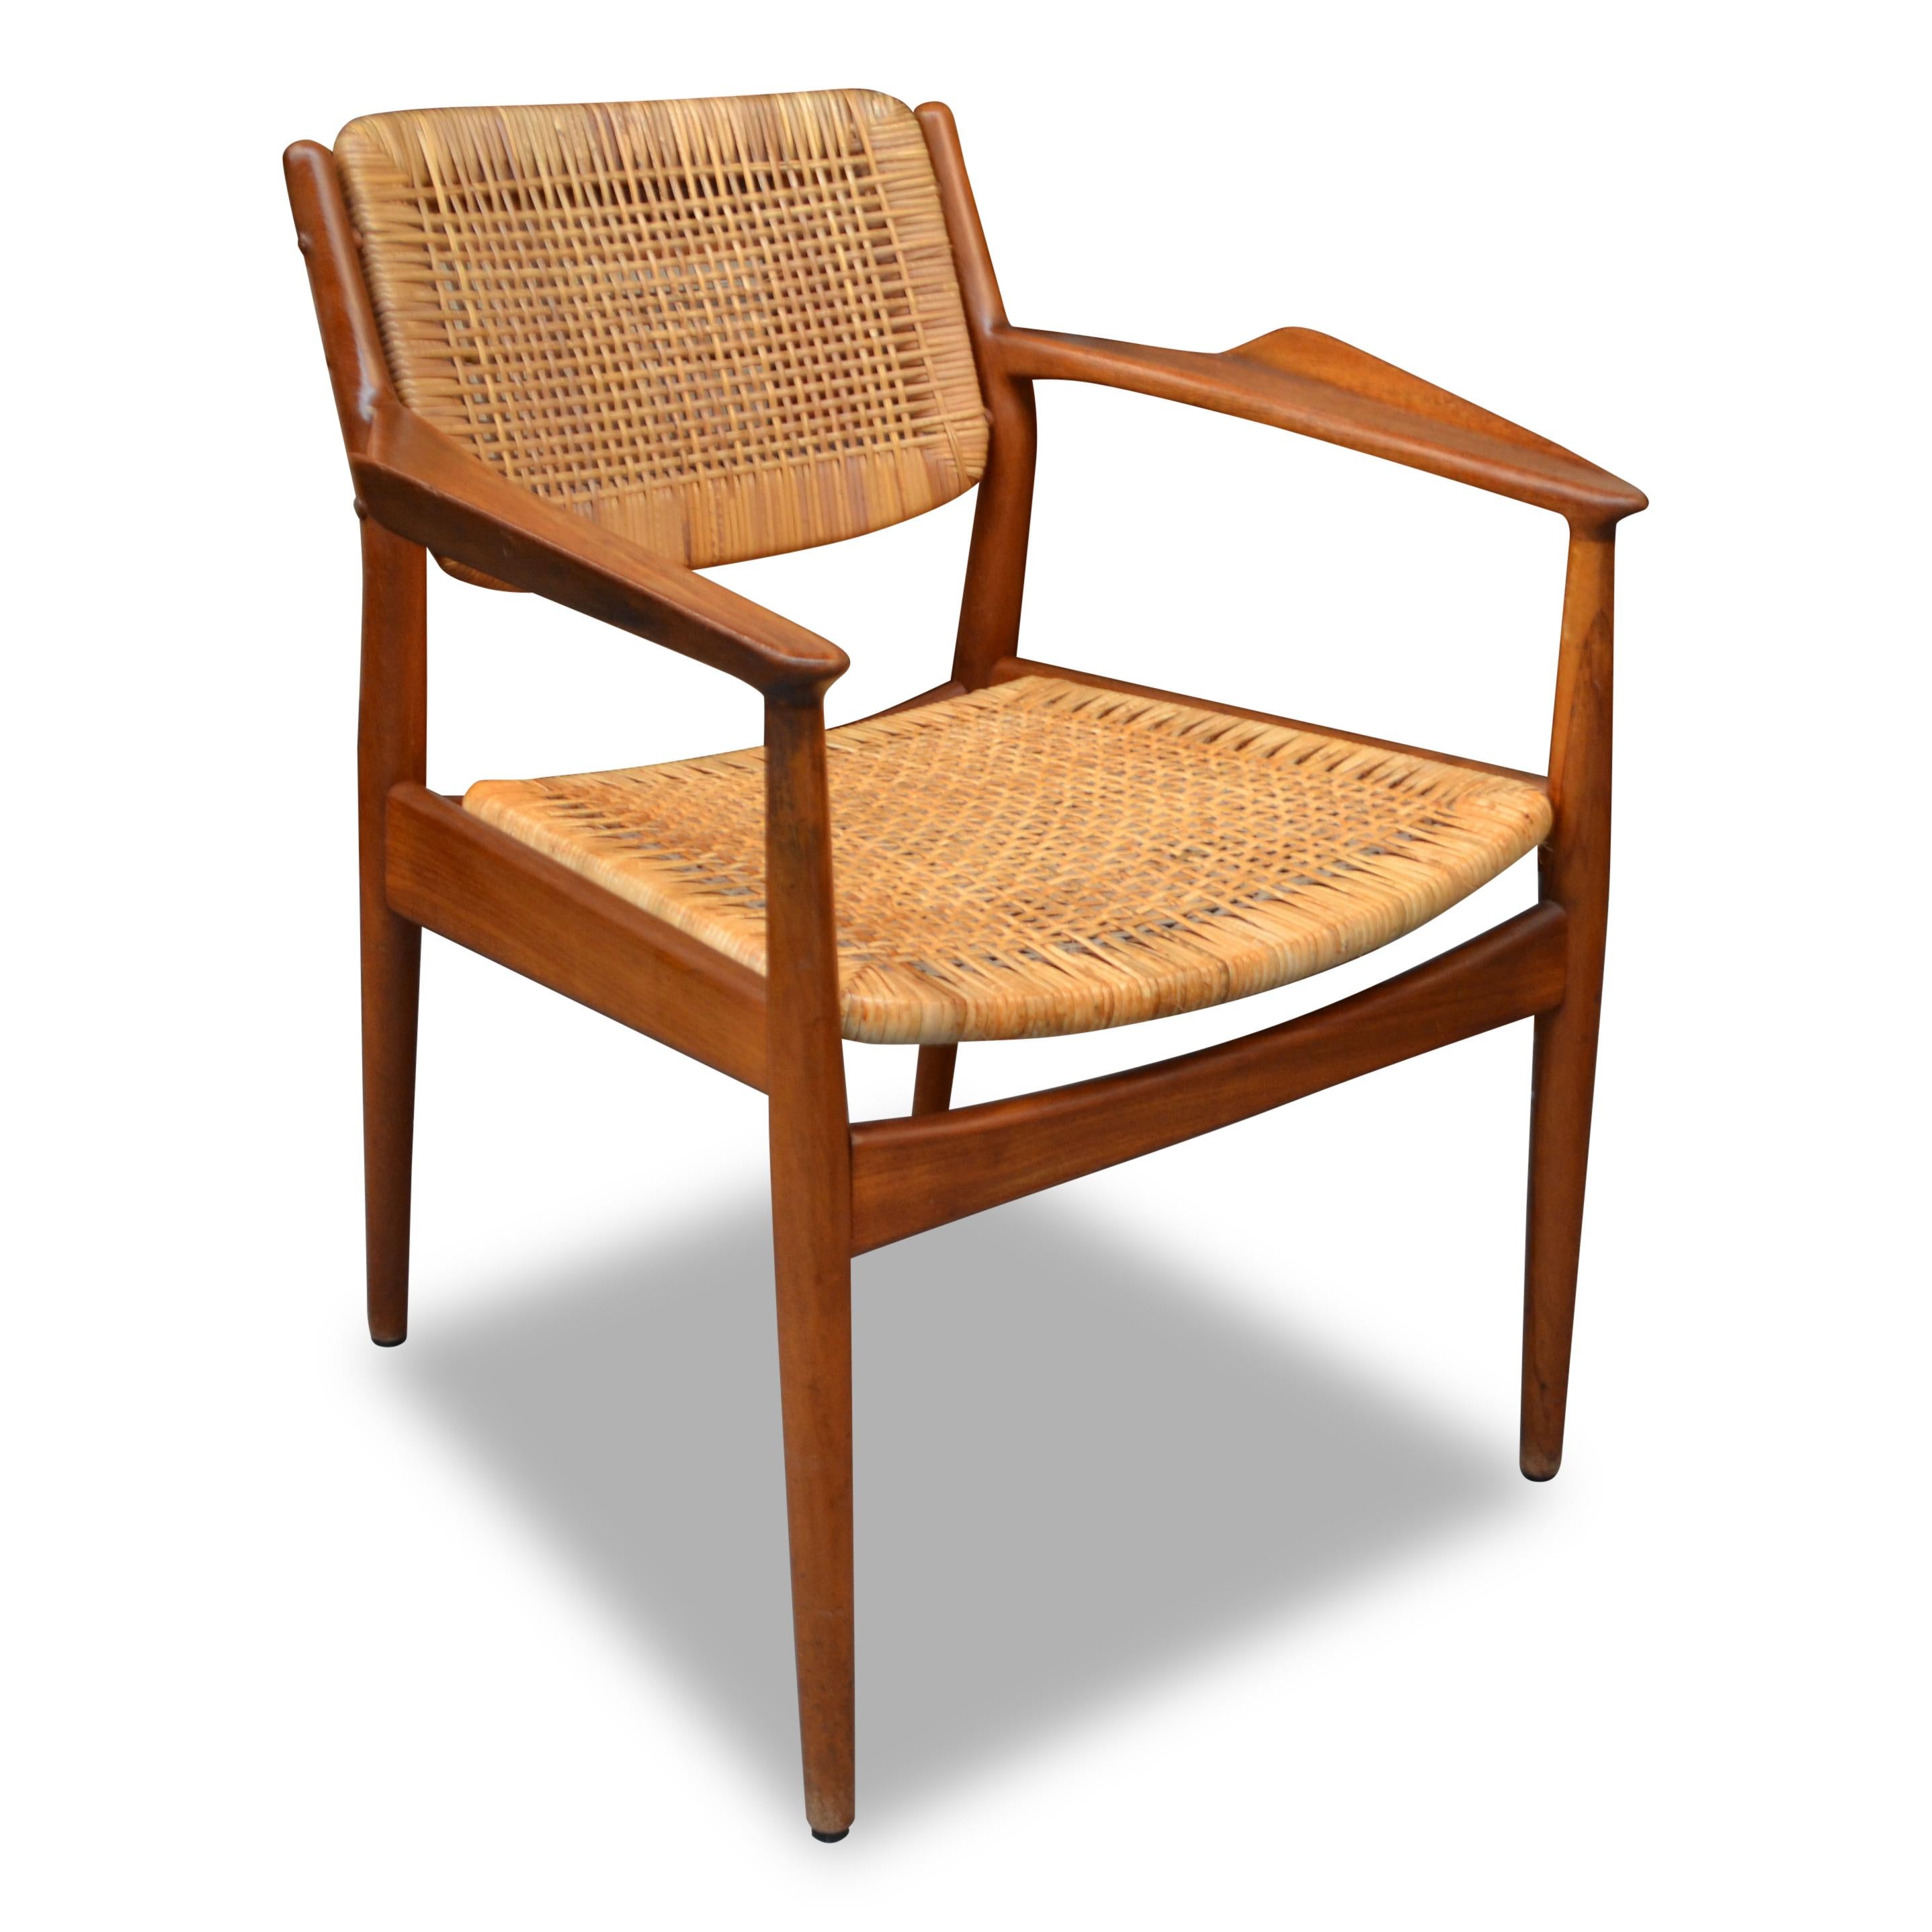 Rare vintage Danish design teak/rattan chair designed by Arne Vodder for Sibast Furniture in the 1950s. Arne Vodder was trained by Finn Juhl and eventually became his business partner. He studied under Juhl at the Royal Danish Academy of Fine Arts